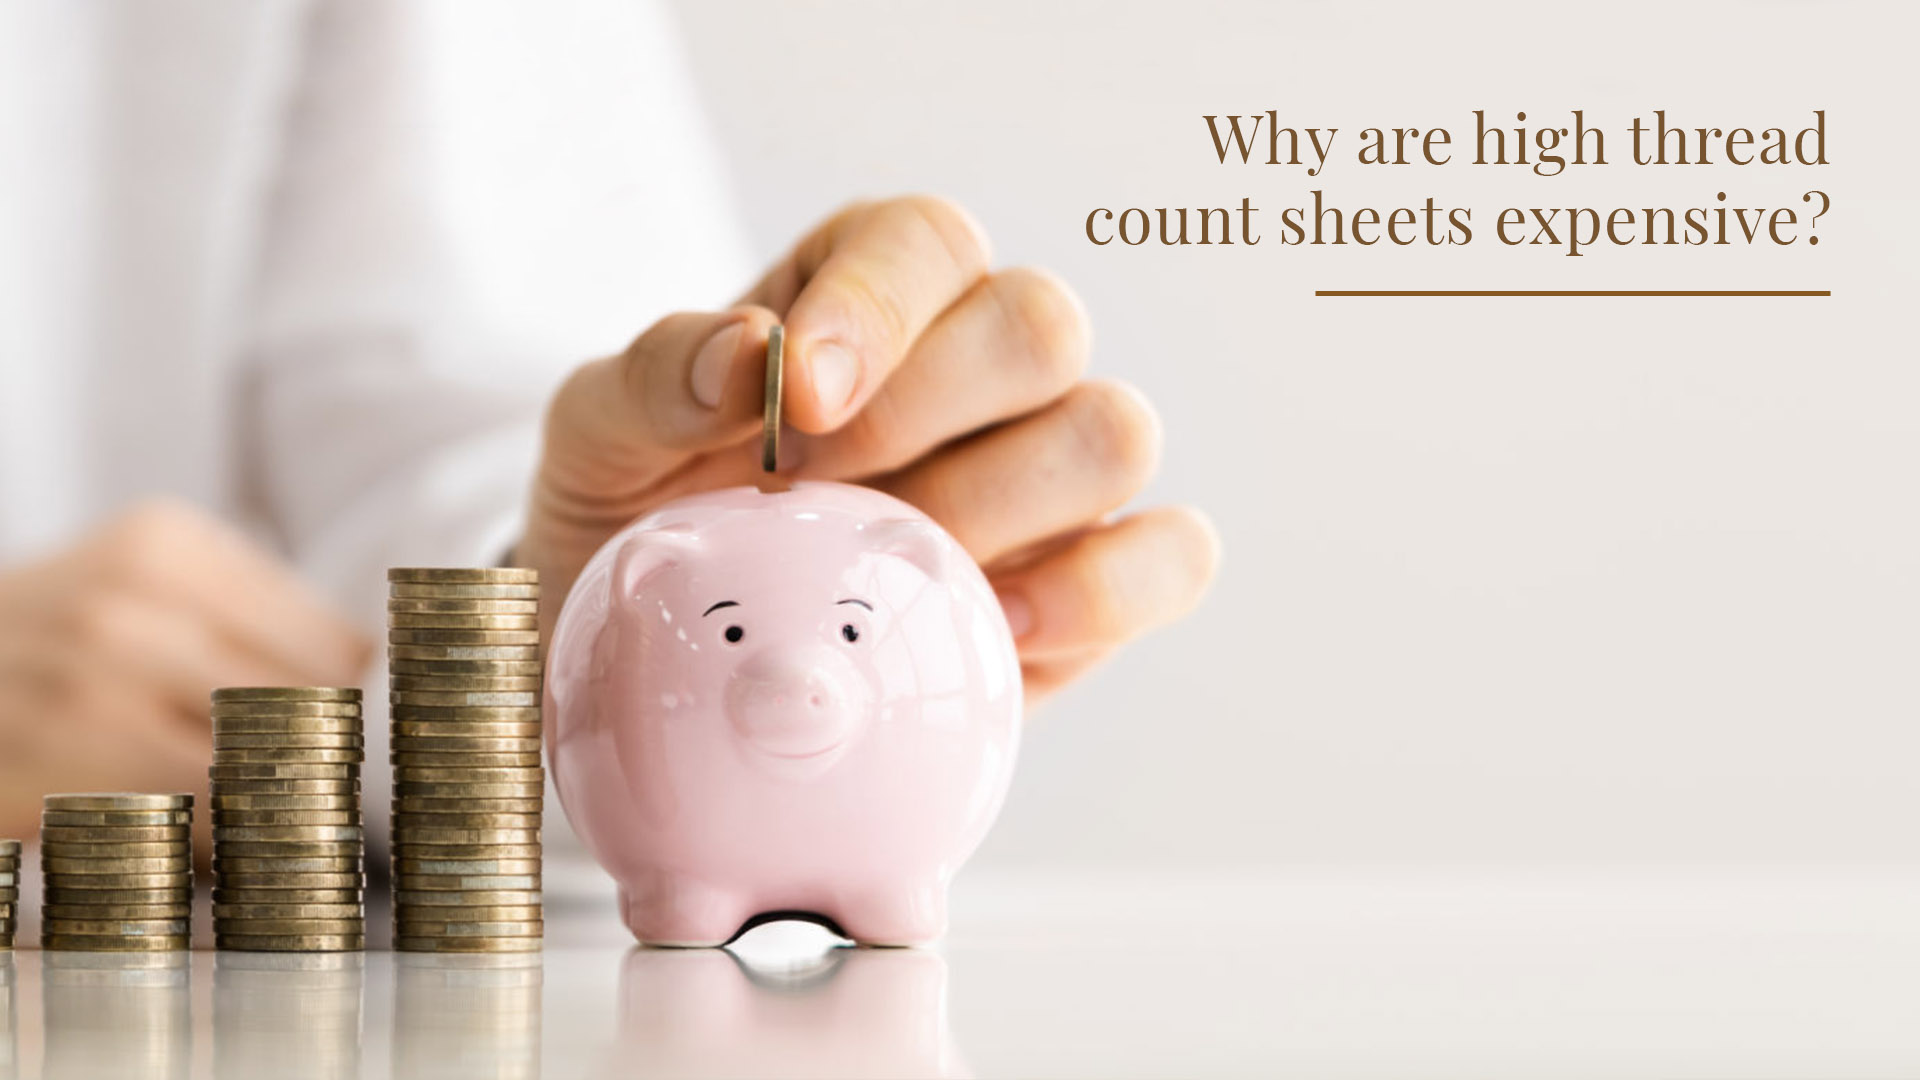 Why are high thread count sheets expensive?